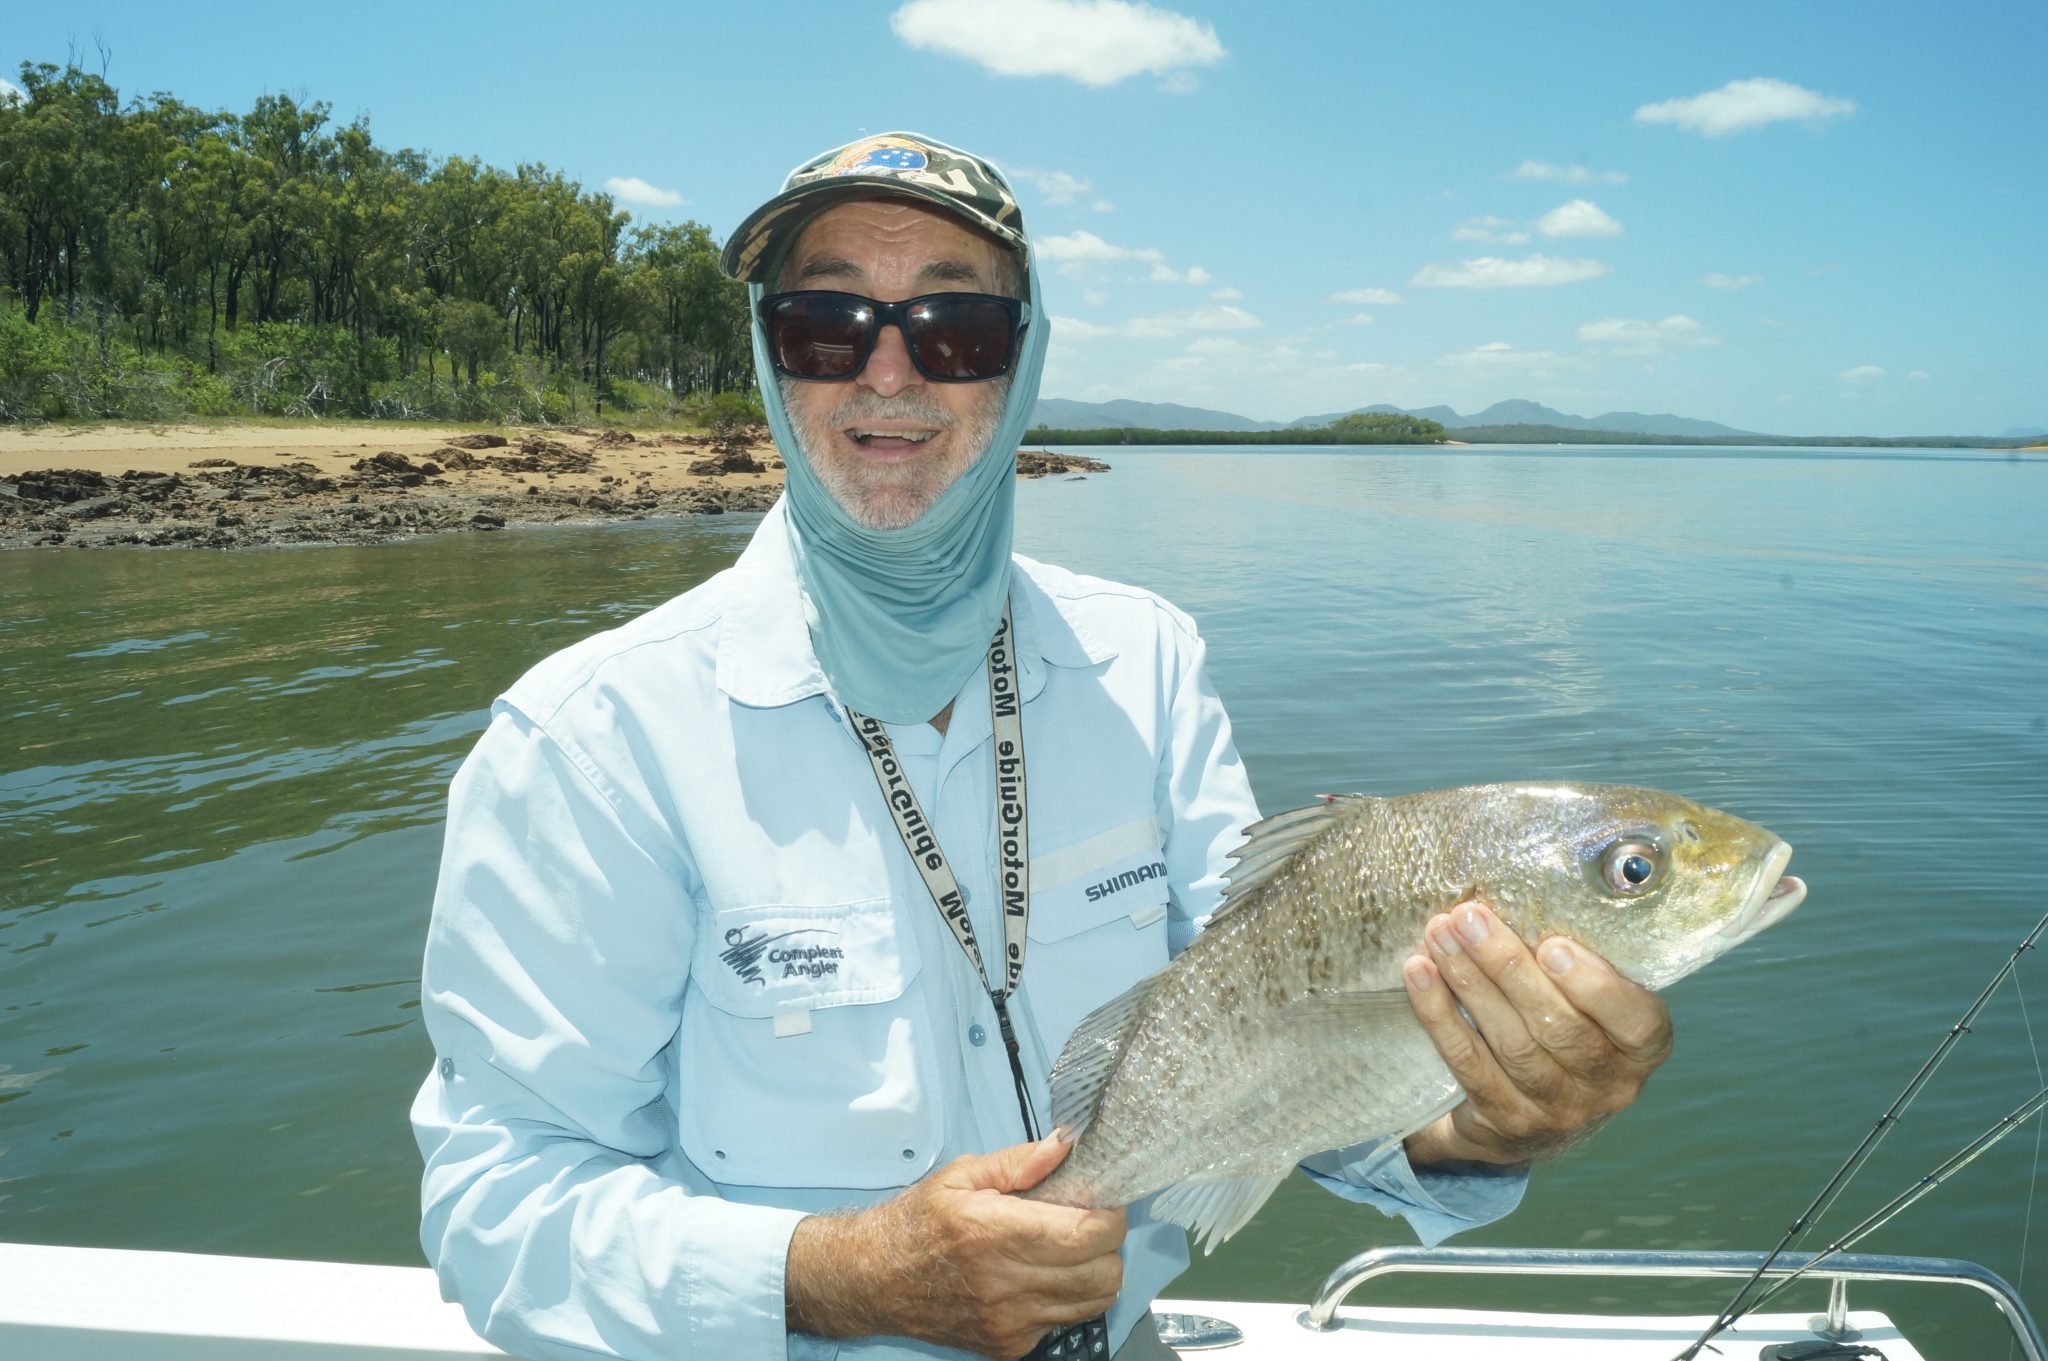 Hunting Grunter with Hard-bodies - By Dave Magner - Fish & Boat Magazine